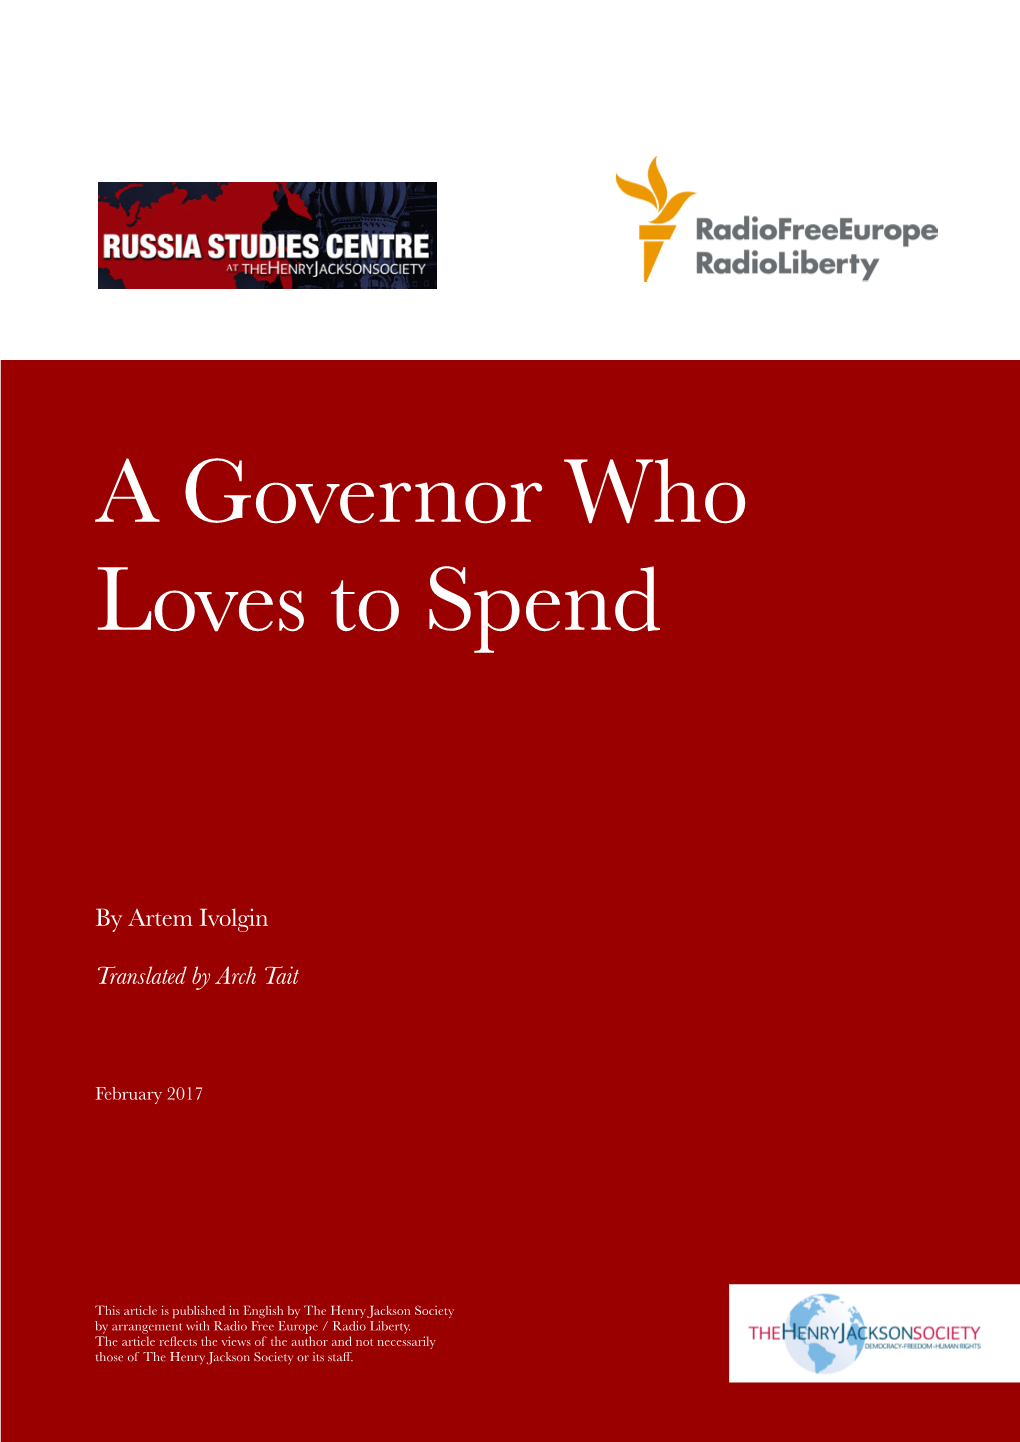 A Governor Who Loves to Spend